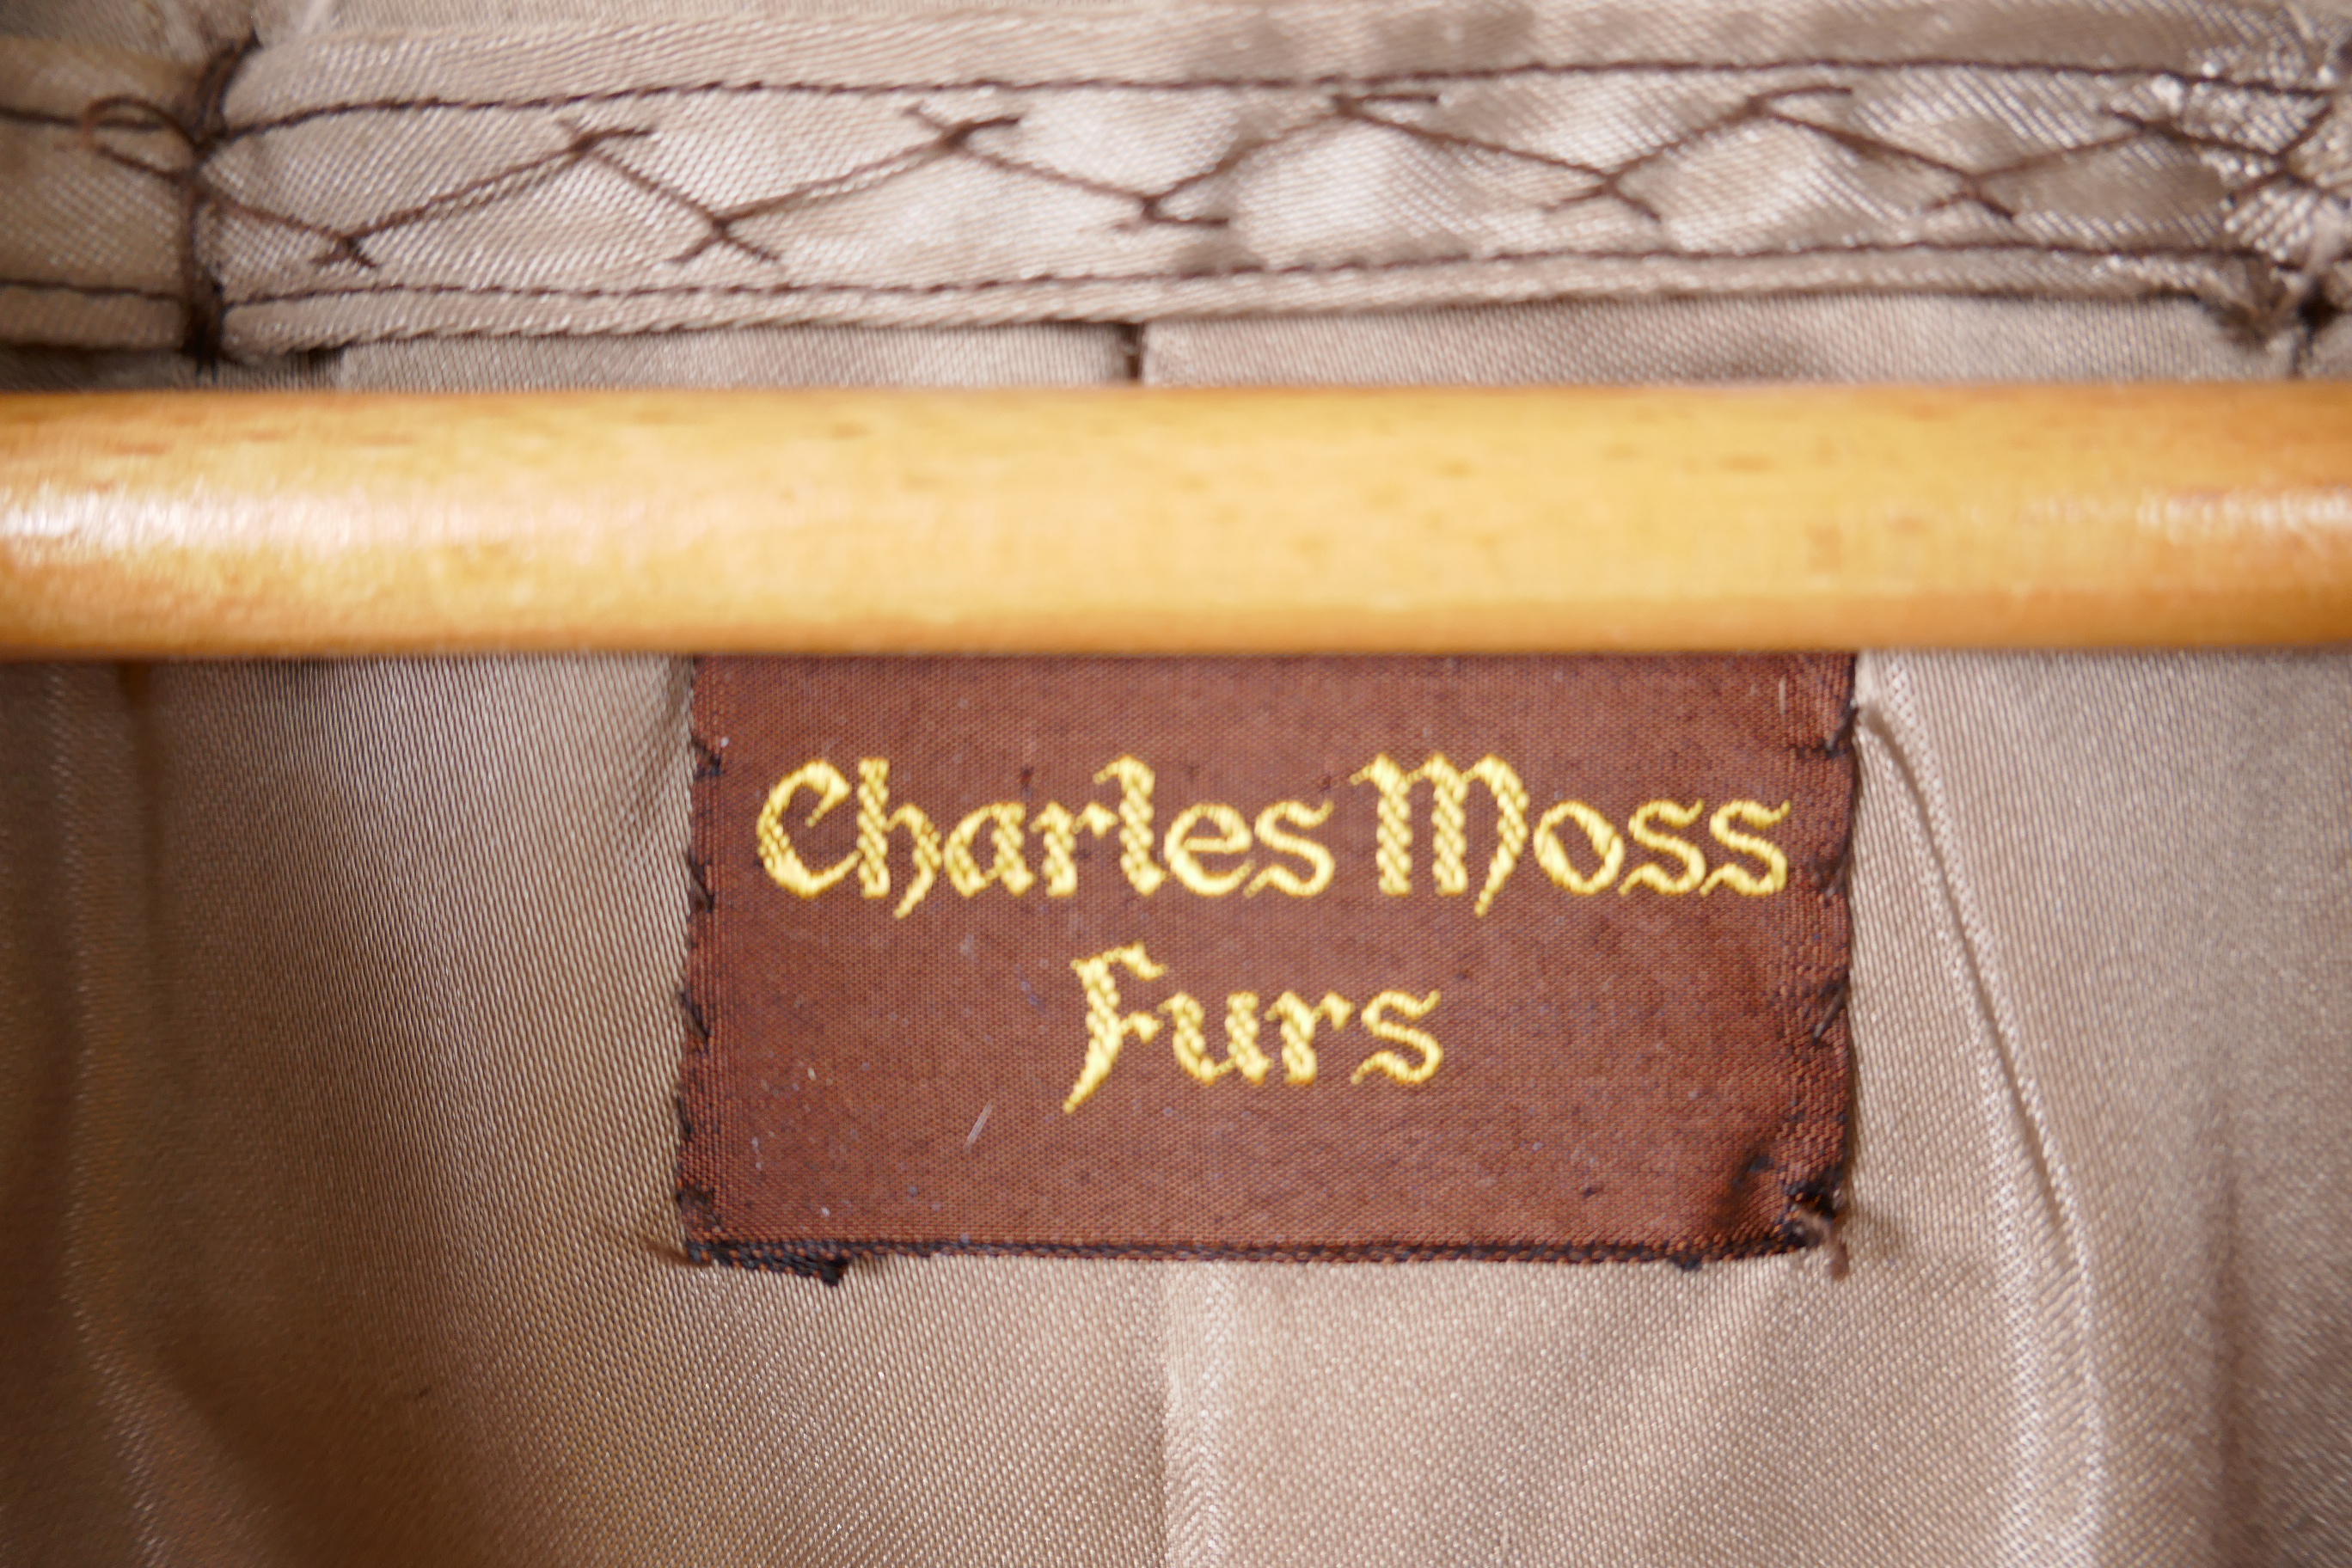 A lady's full length fur coat (mink), from Charles Moss Furs, approximate size 14, 43" long - Image 3 of 3